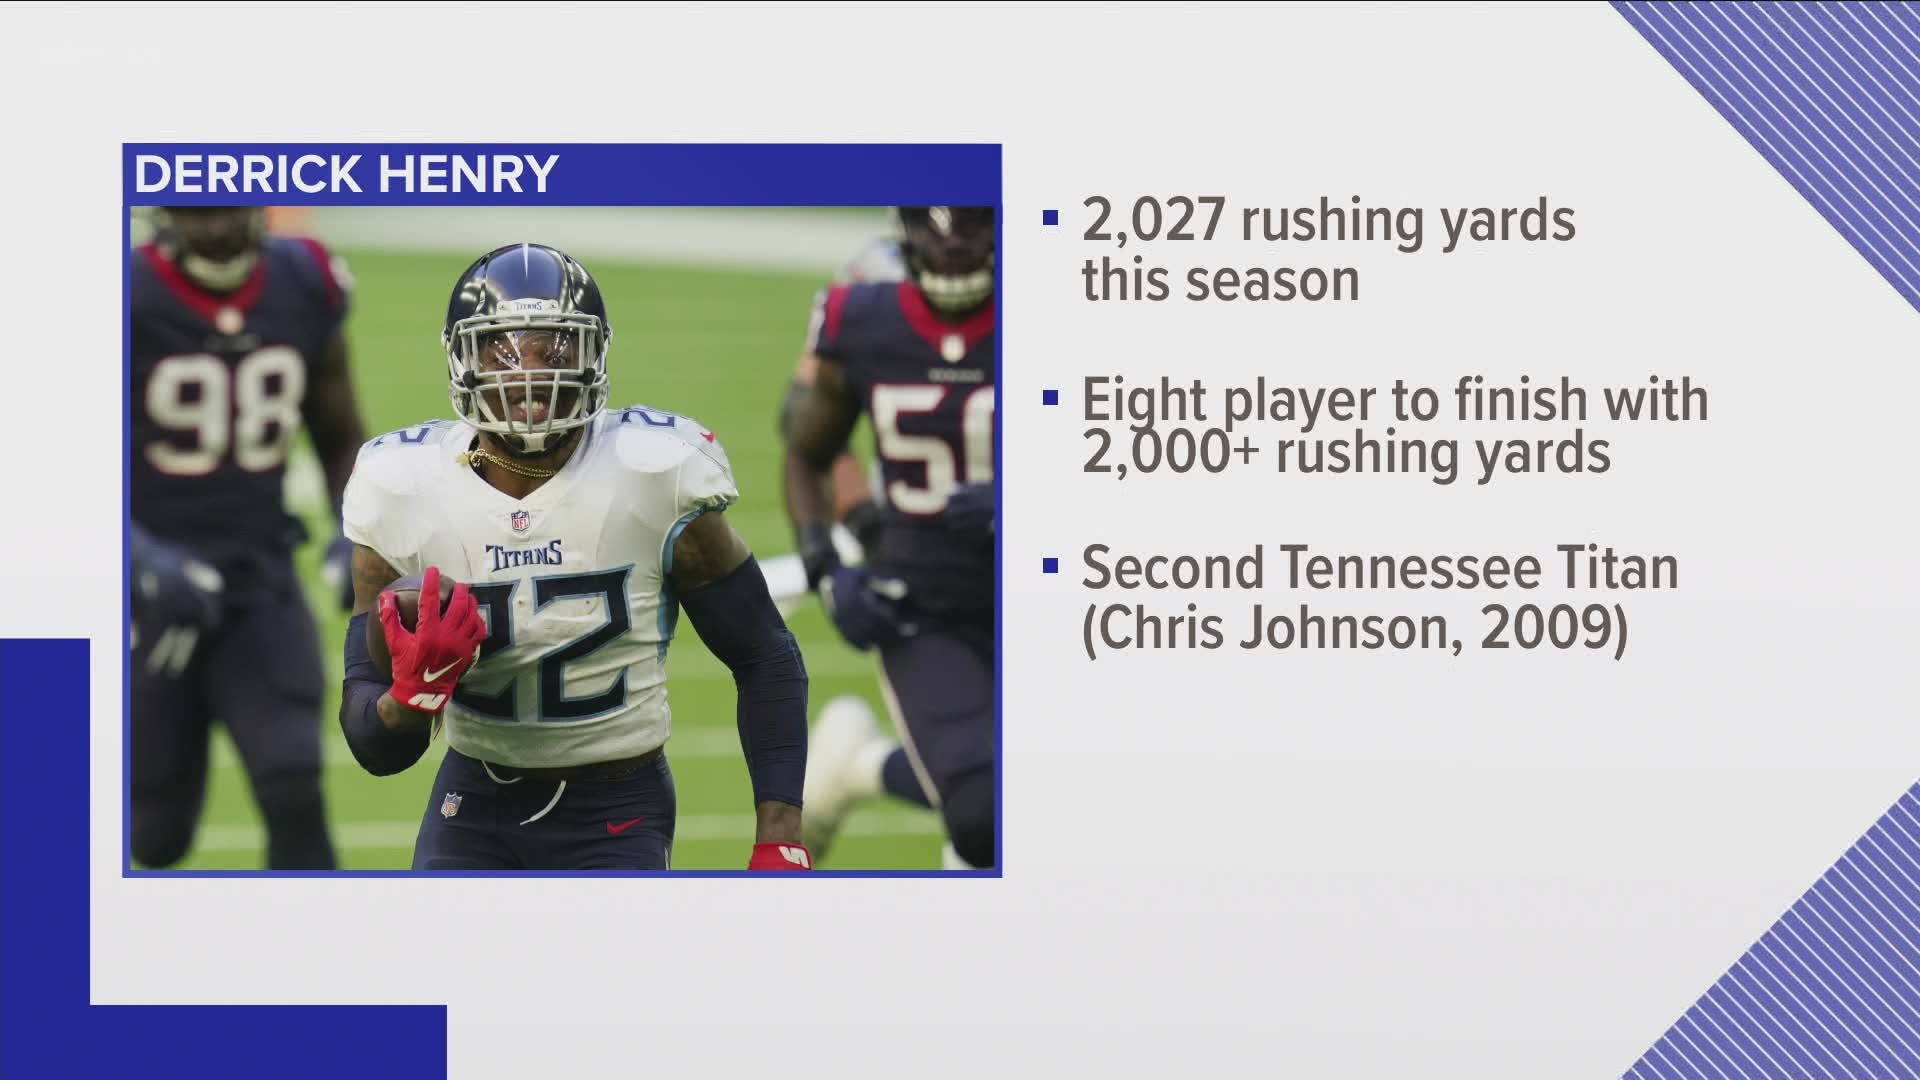 Derrick Henry becomes the eighth running back in NFL history to eclipse 2,000 yards rushing in a single season.